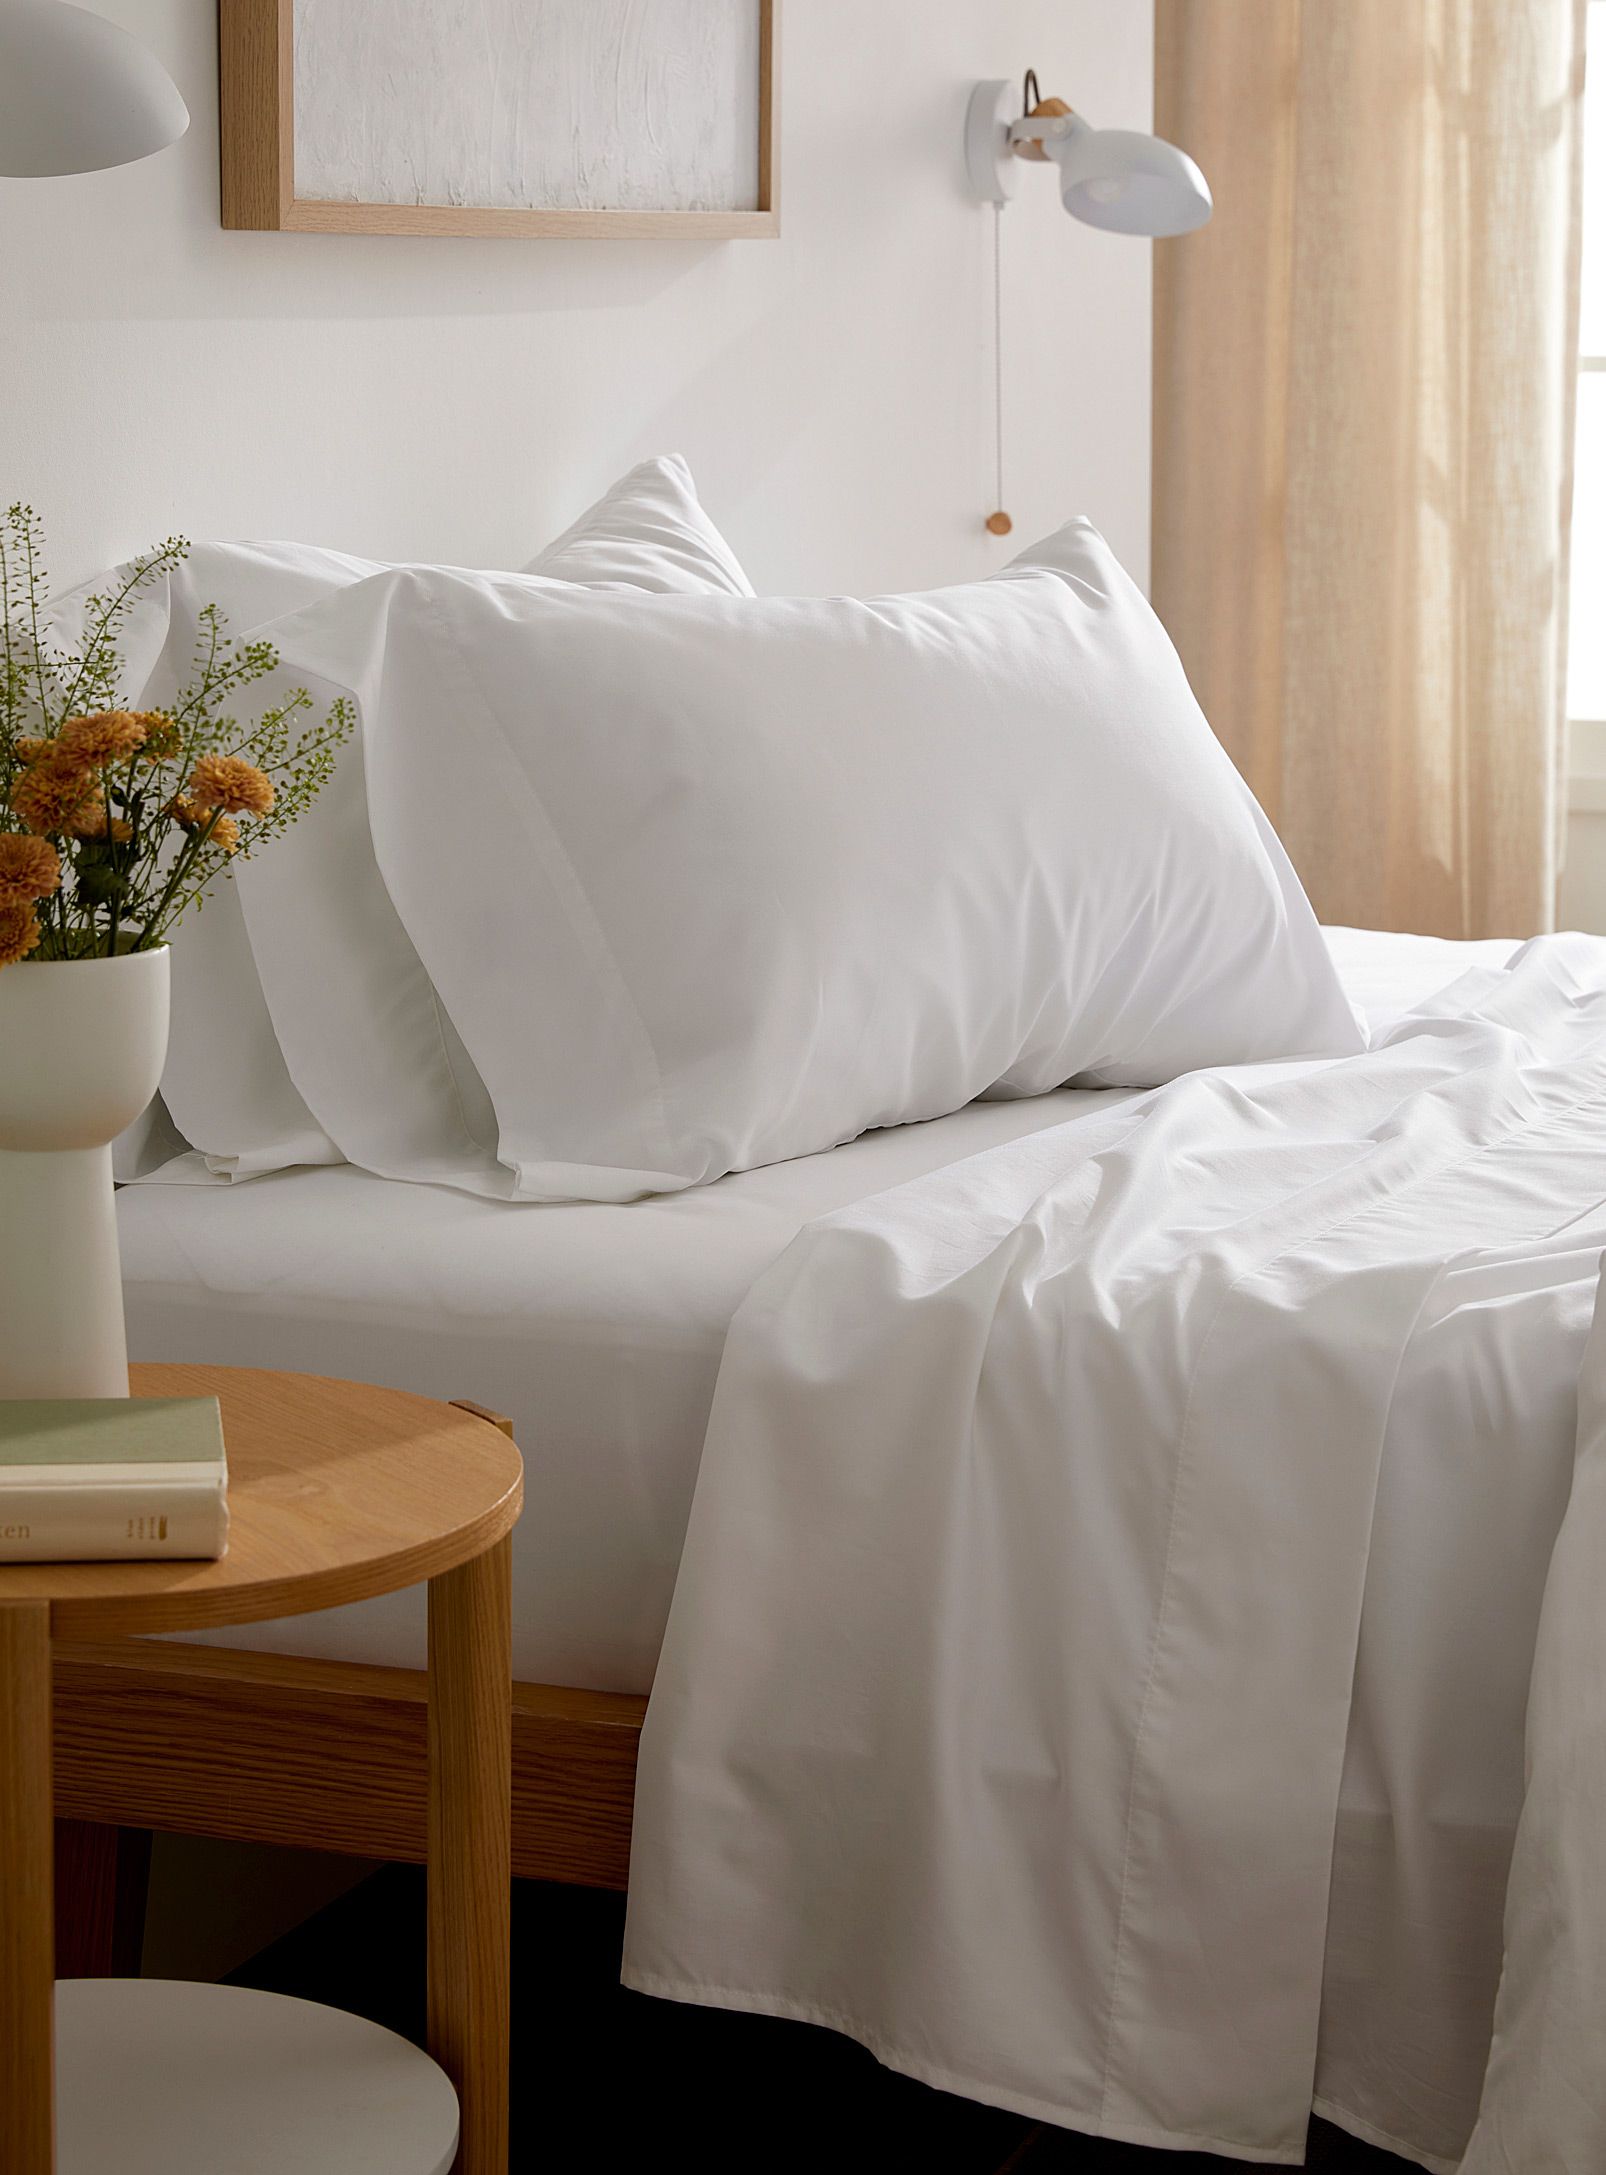 Hôtels Le Germain Egyptian Cotton And Bamboo Rayon 330-thread-count Sheet Set In White